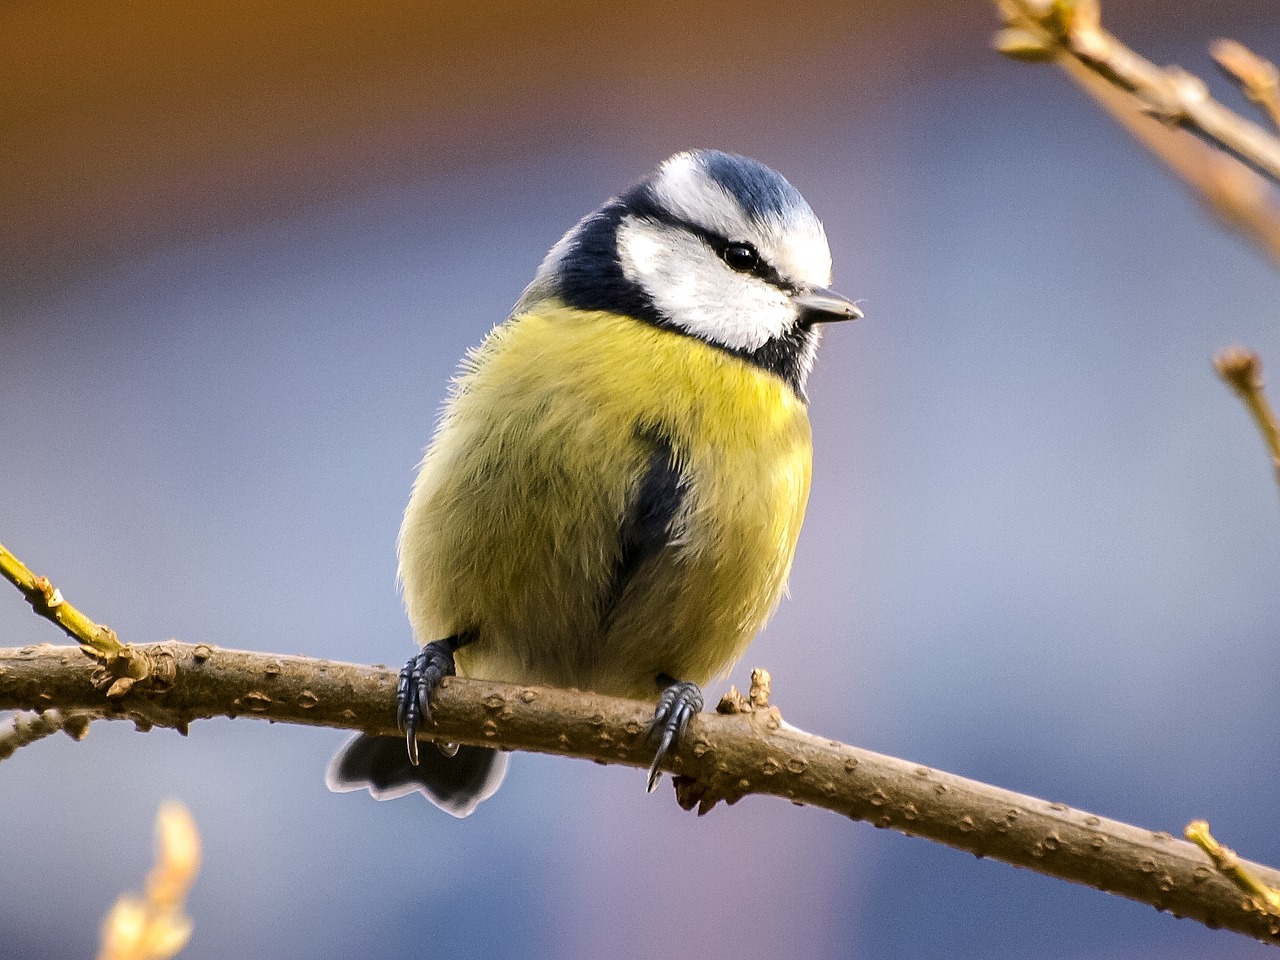 a small bird sitting on top of a tree branch, inspired by Paul Bird, pexels, bauhaus, blue and yellow, highly detailed photo 4k, 2 0 2 2 photo, springtime morning